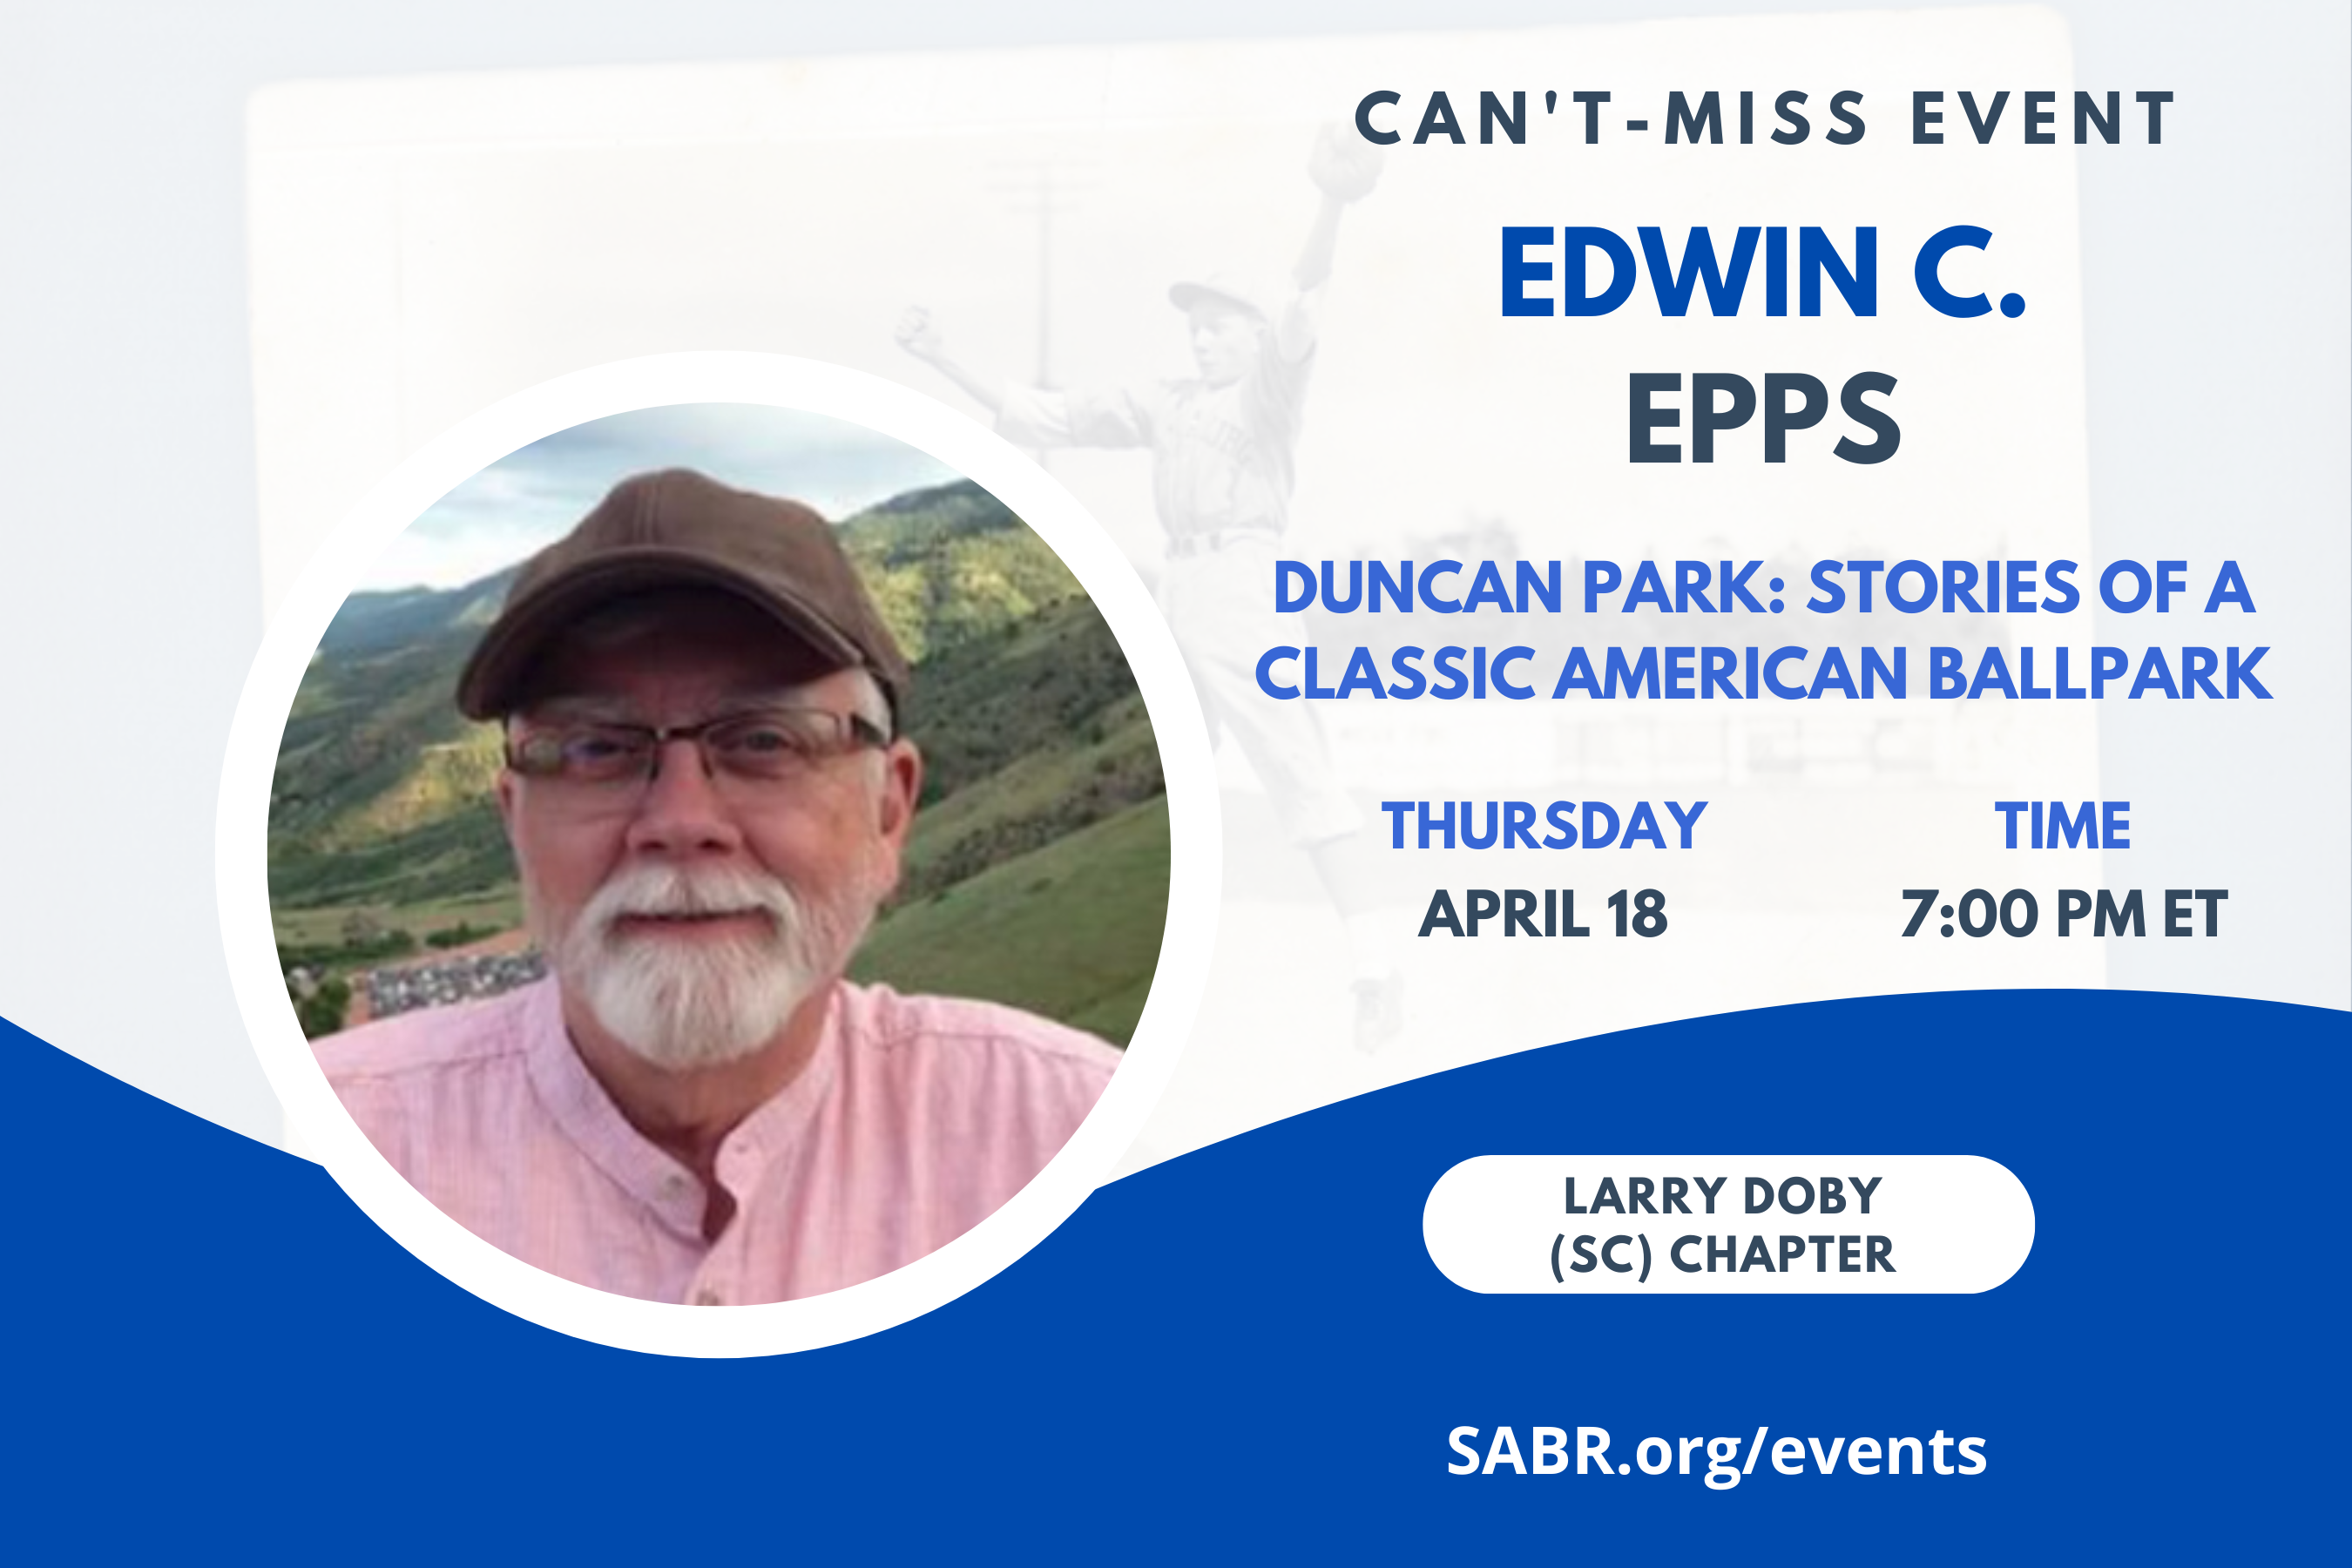 SABR's Larry Doby Chapter in South Carolina will hold its next virtual Zoom meeting on Thursday, April 18 at 7:00 p.m. ET. All baseball fans are welcome to attend. Our guest speaker is Edwin C. Epps, who wrote Duncan Park: Stories of a Classic American Ballpark, which was recently honored with the SABR Baseball Research Award. 